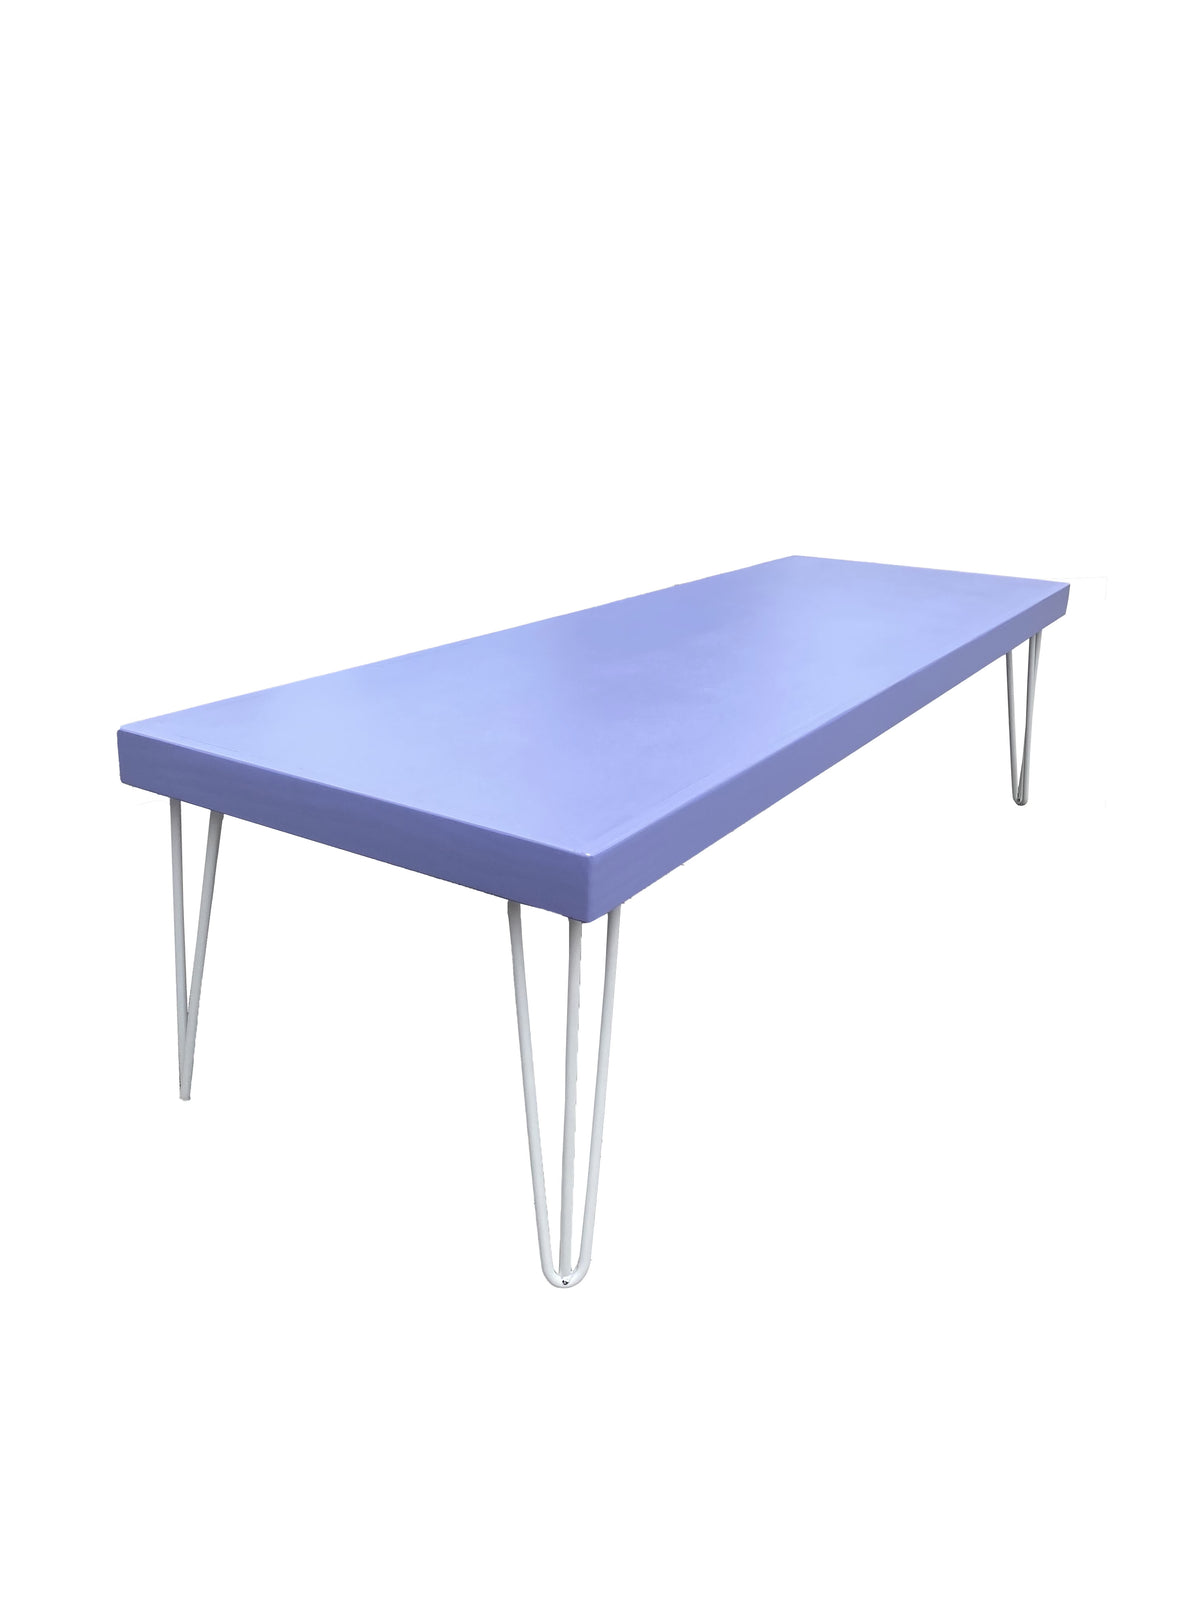 Kids Modern Lavender Table With White Metal Legs